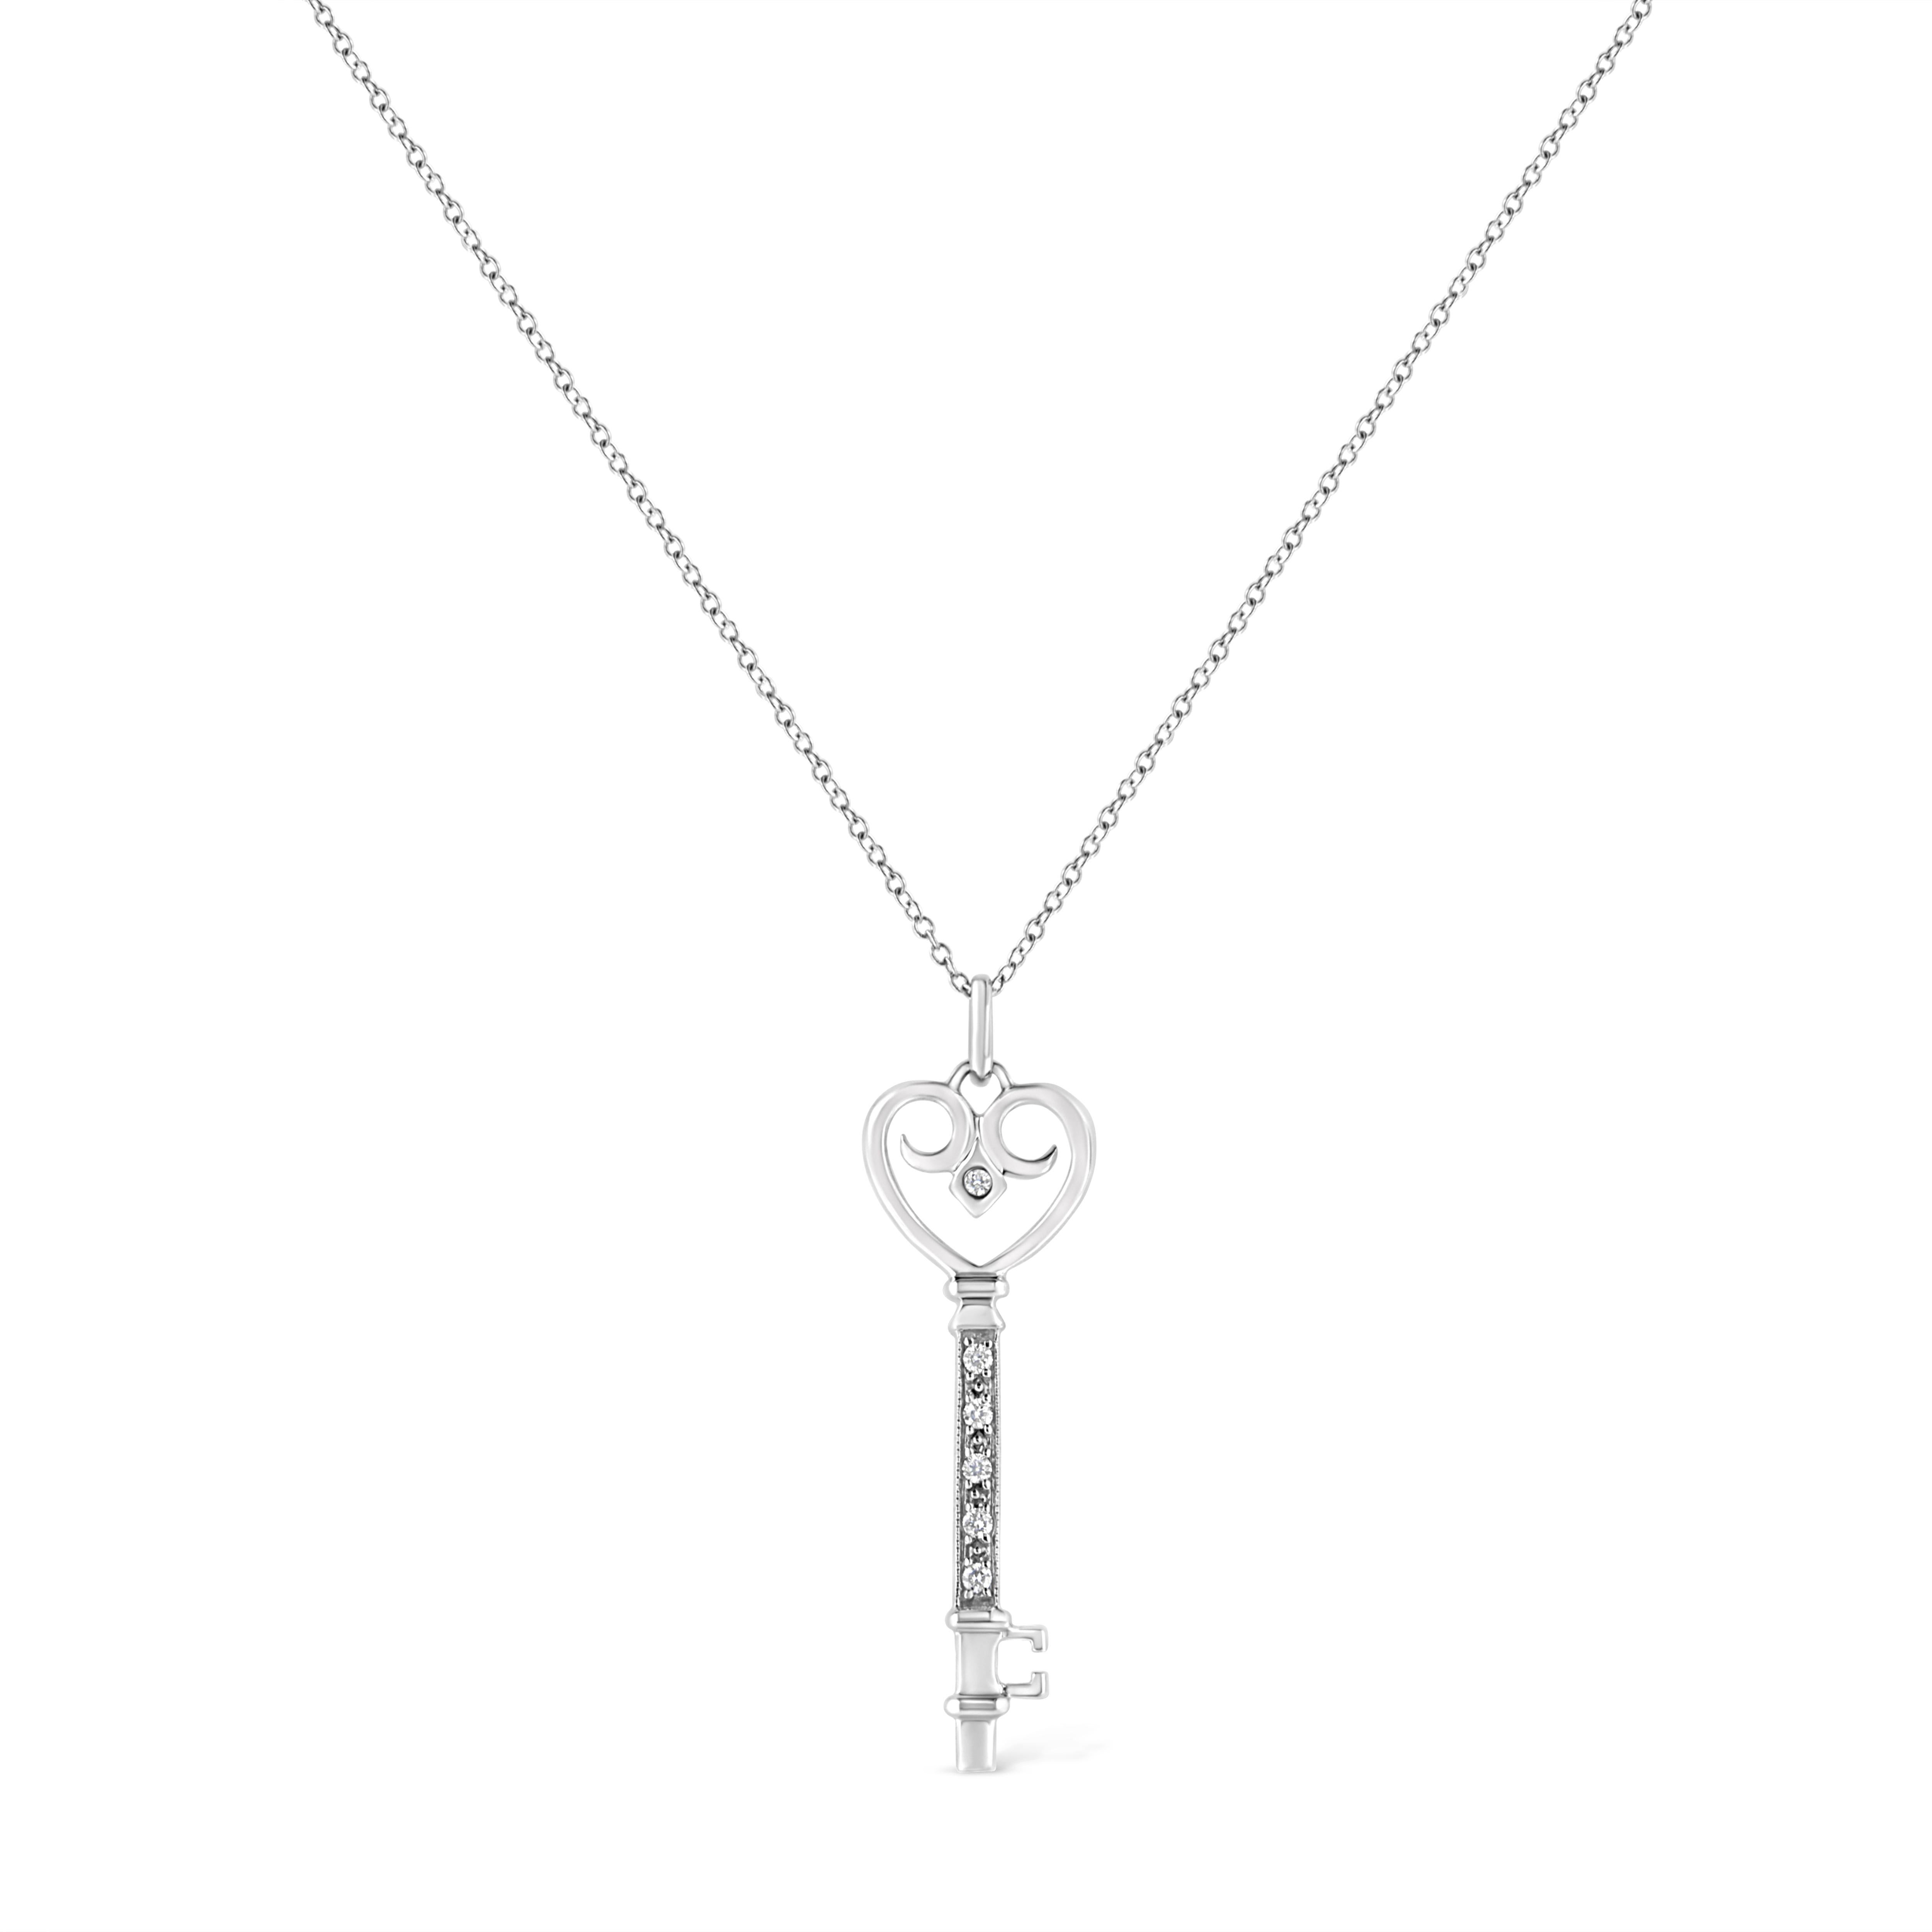 This sweet and romantic style diamond key pendant will brighten her smile. Crafted on sterling silver the heart-shaped bow of the key sparkles with a bezel set round cut diamond, while the stem and blade features 5 alluring prong set round cut